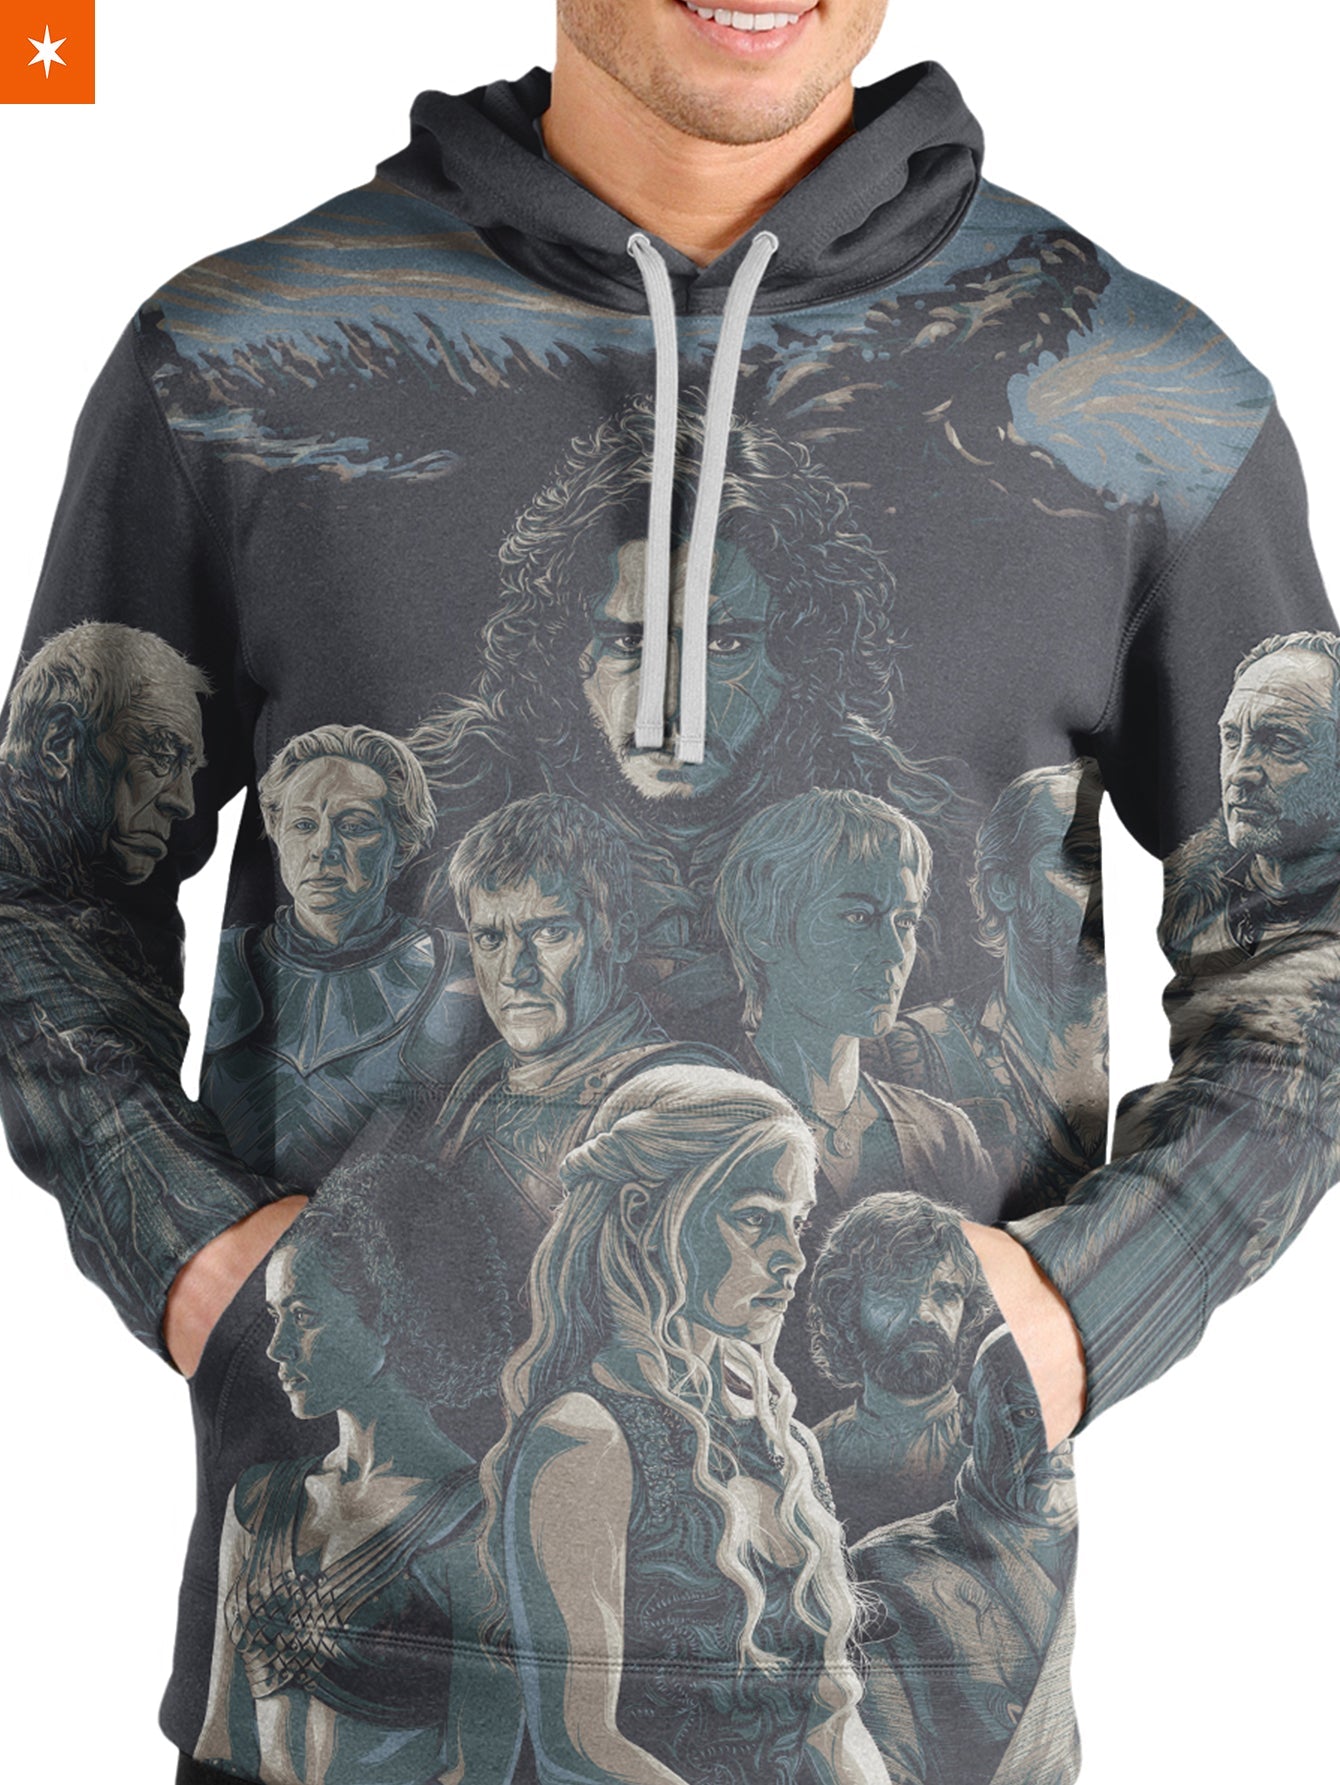 Fandomaniax - For The Throne Unisex Pullover Hoodie